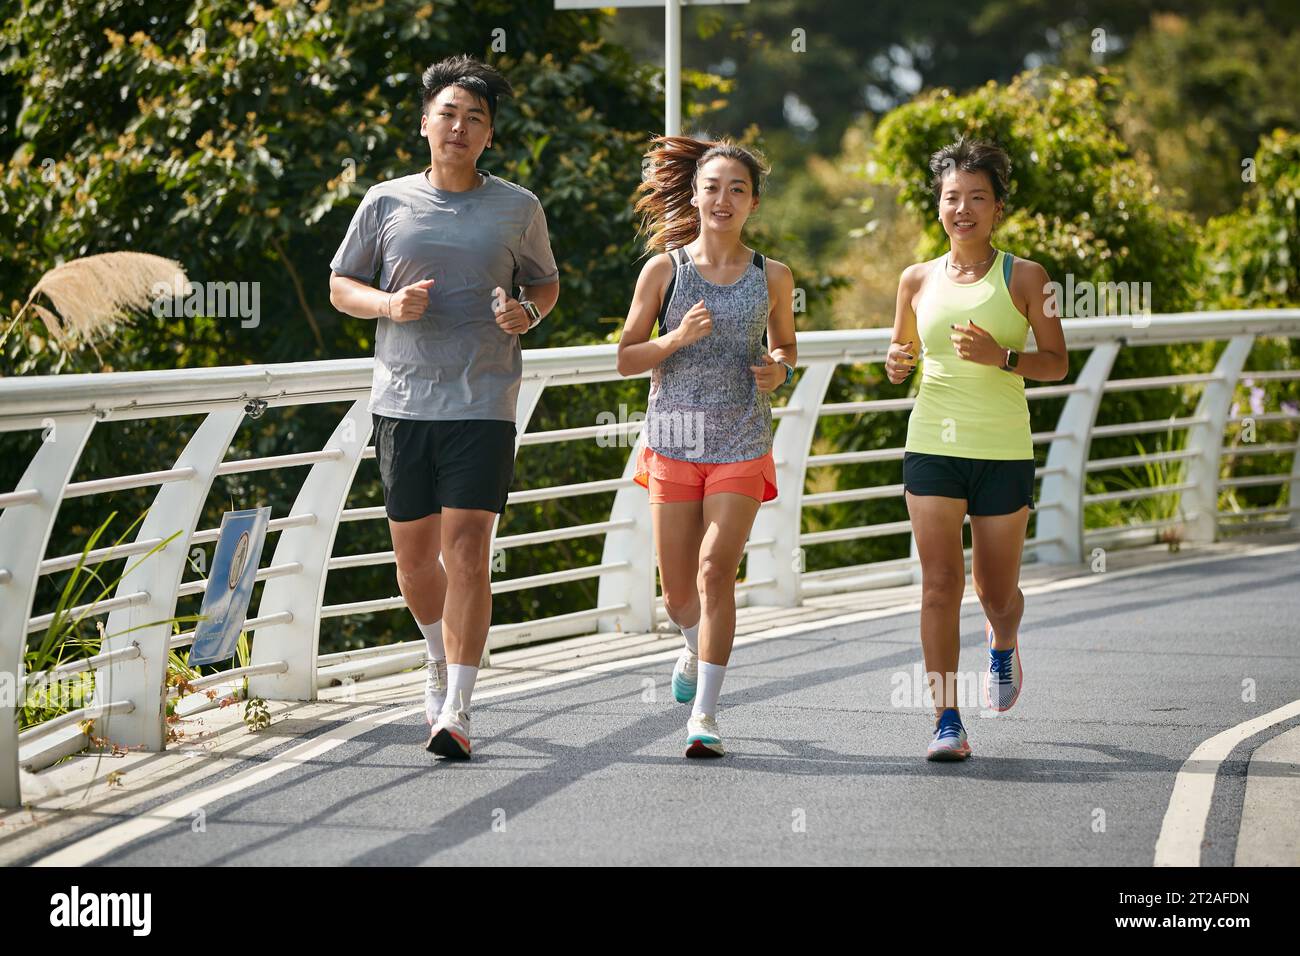 https://c8.alamy.com/comp/2T2AFDN/three-young-asian-women-female-joggers-exercising-outdoors-together-in-city-park-2T2AFDN.jpg